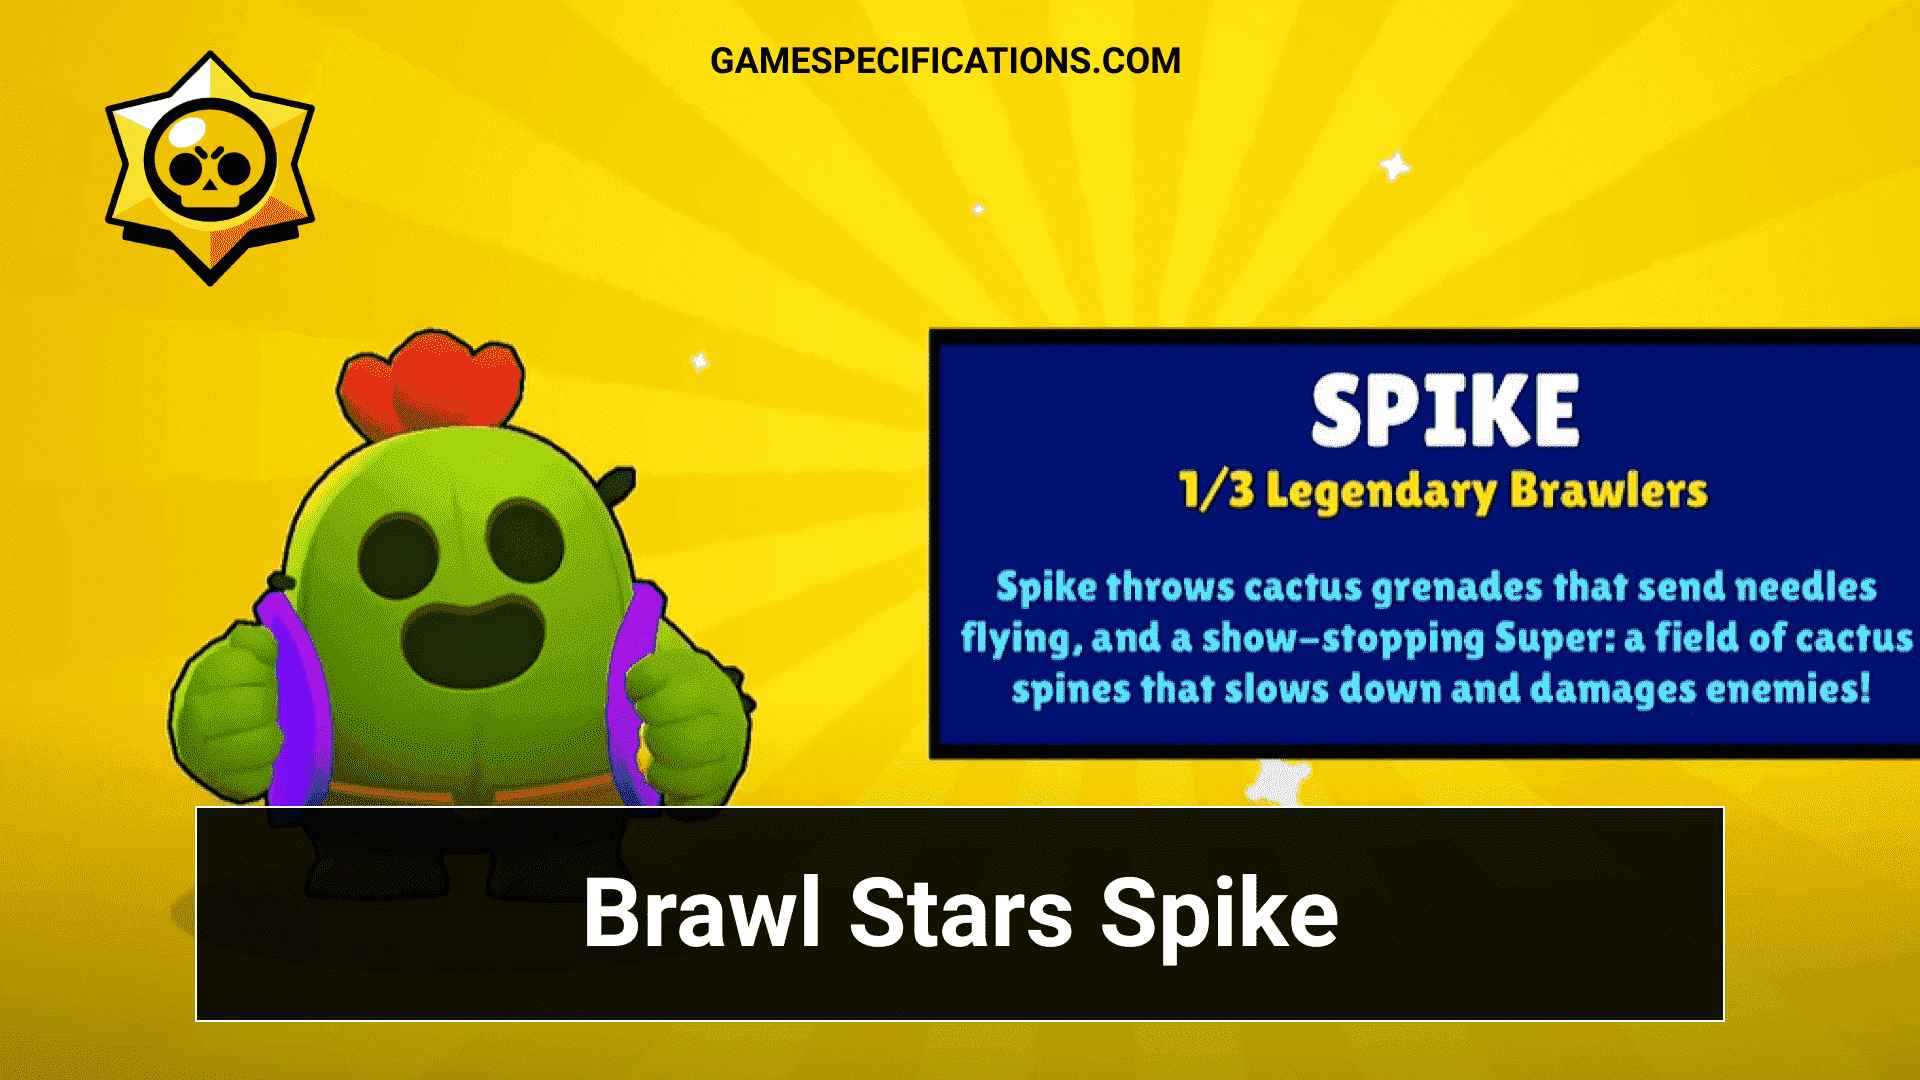 Brawl Stars Spike Introducing The Legendary Character In The Game Game Specifications